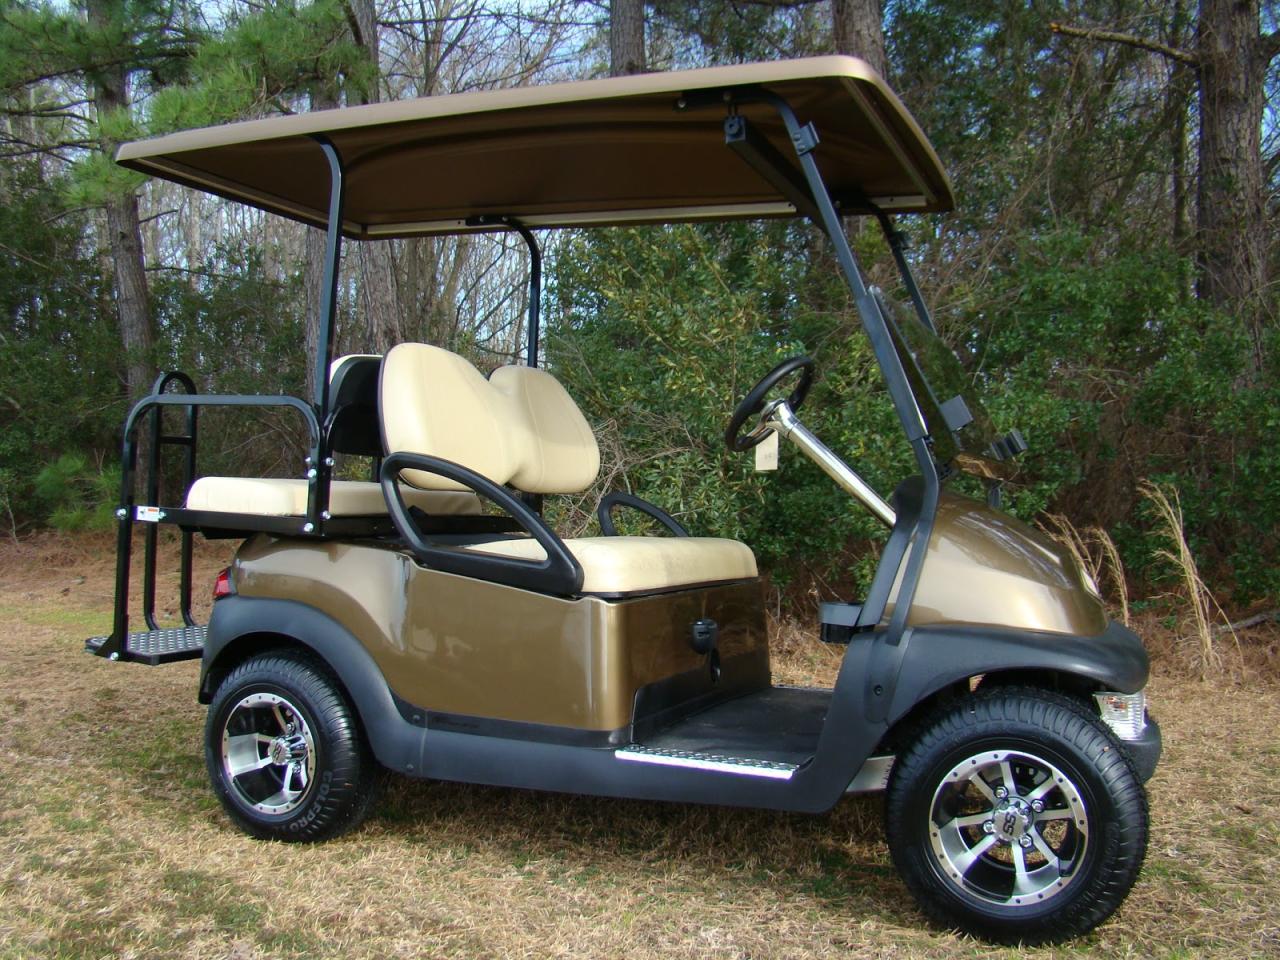 Find Your Dream Golf Cart: Used Golf Carts for Sale by Owner in Nevada, California